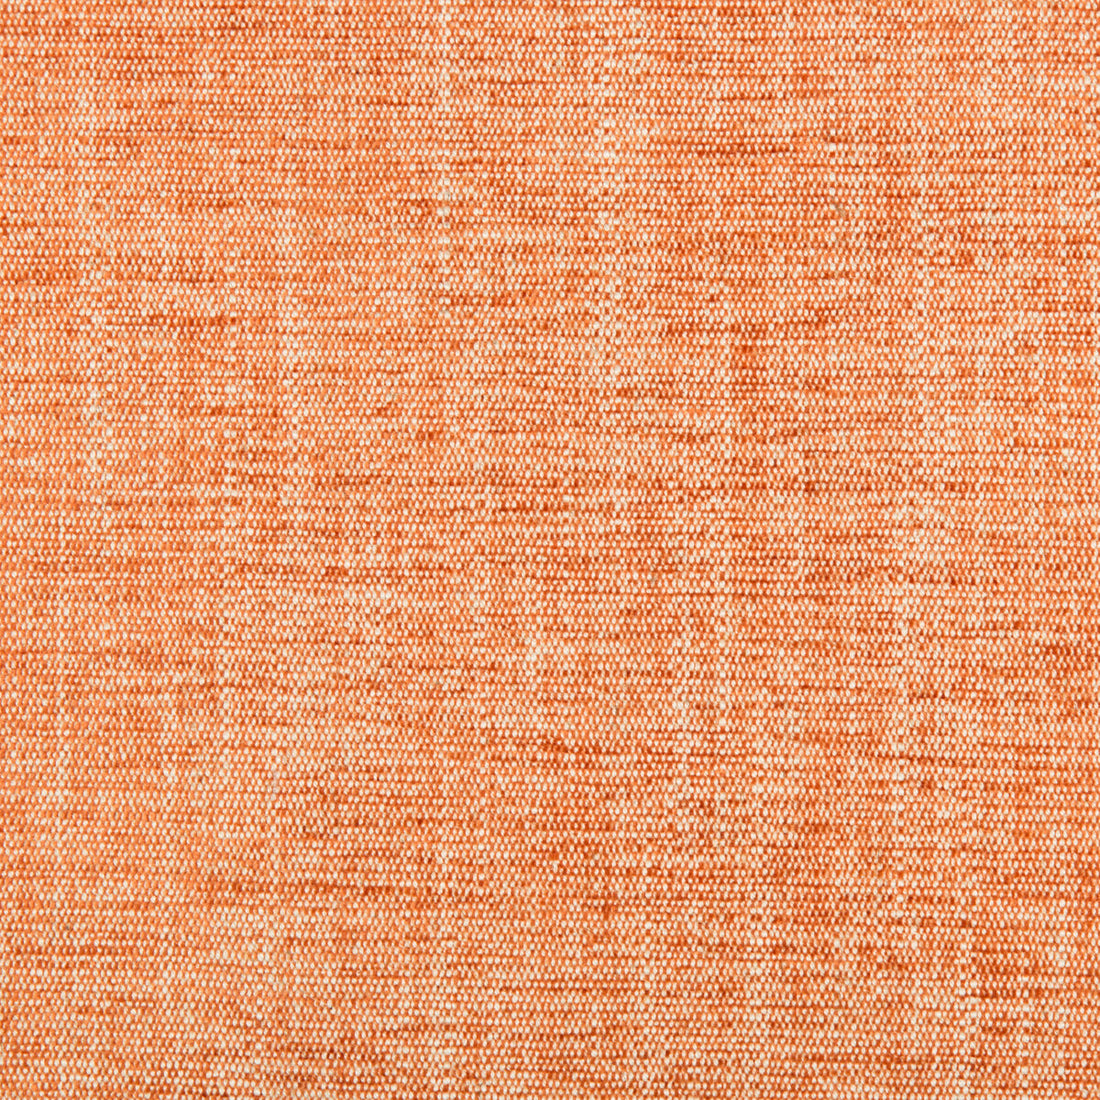 Rutledge fabric in terracotta color - pattern 35297.12.0 - by Kravet Basics in the Greenwich collection